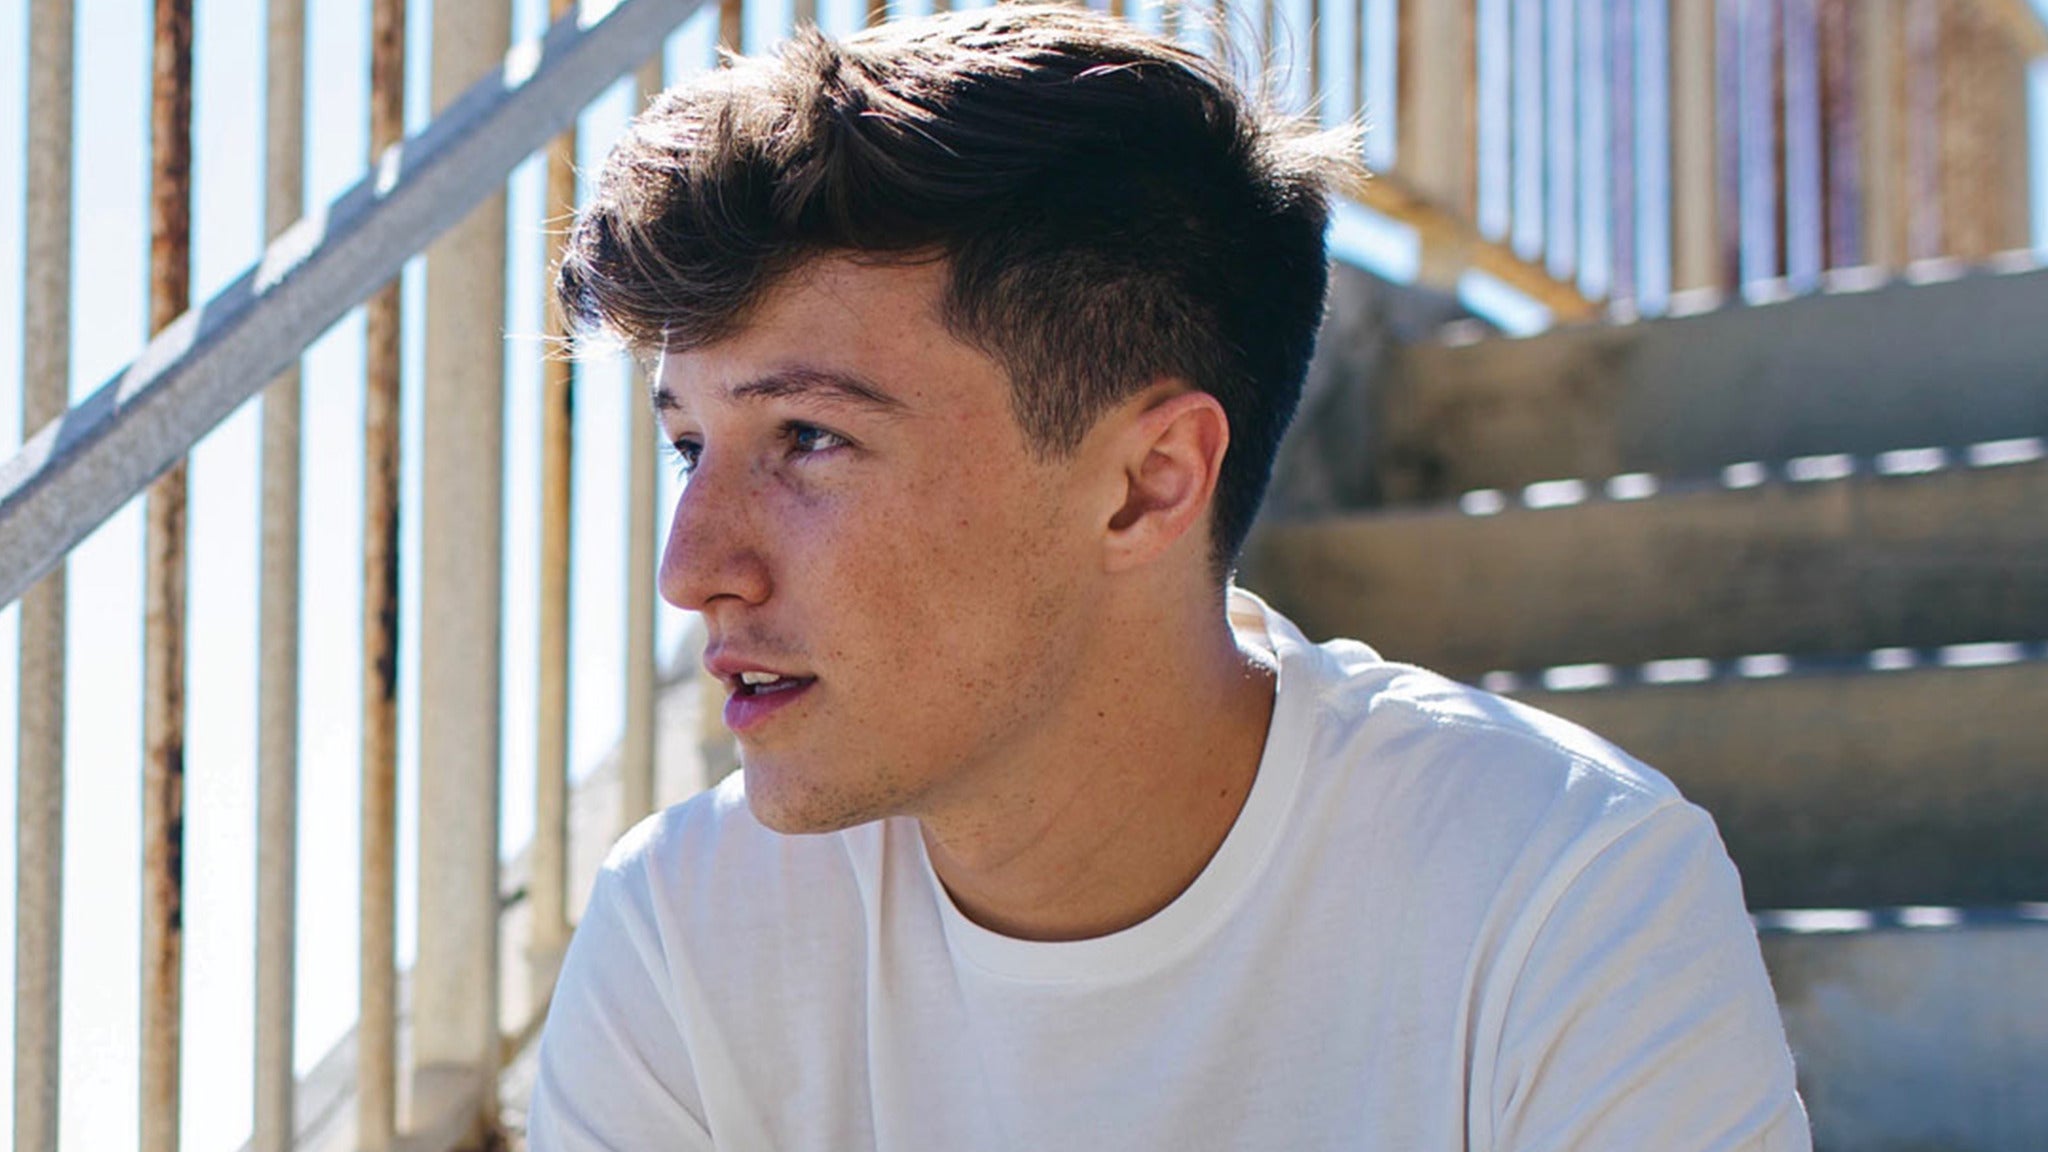 Myles Parrish in San Diego promo photo for Live Nation presale offer code